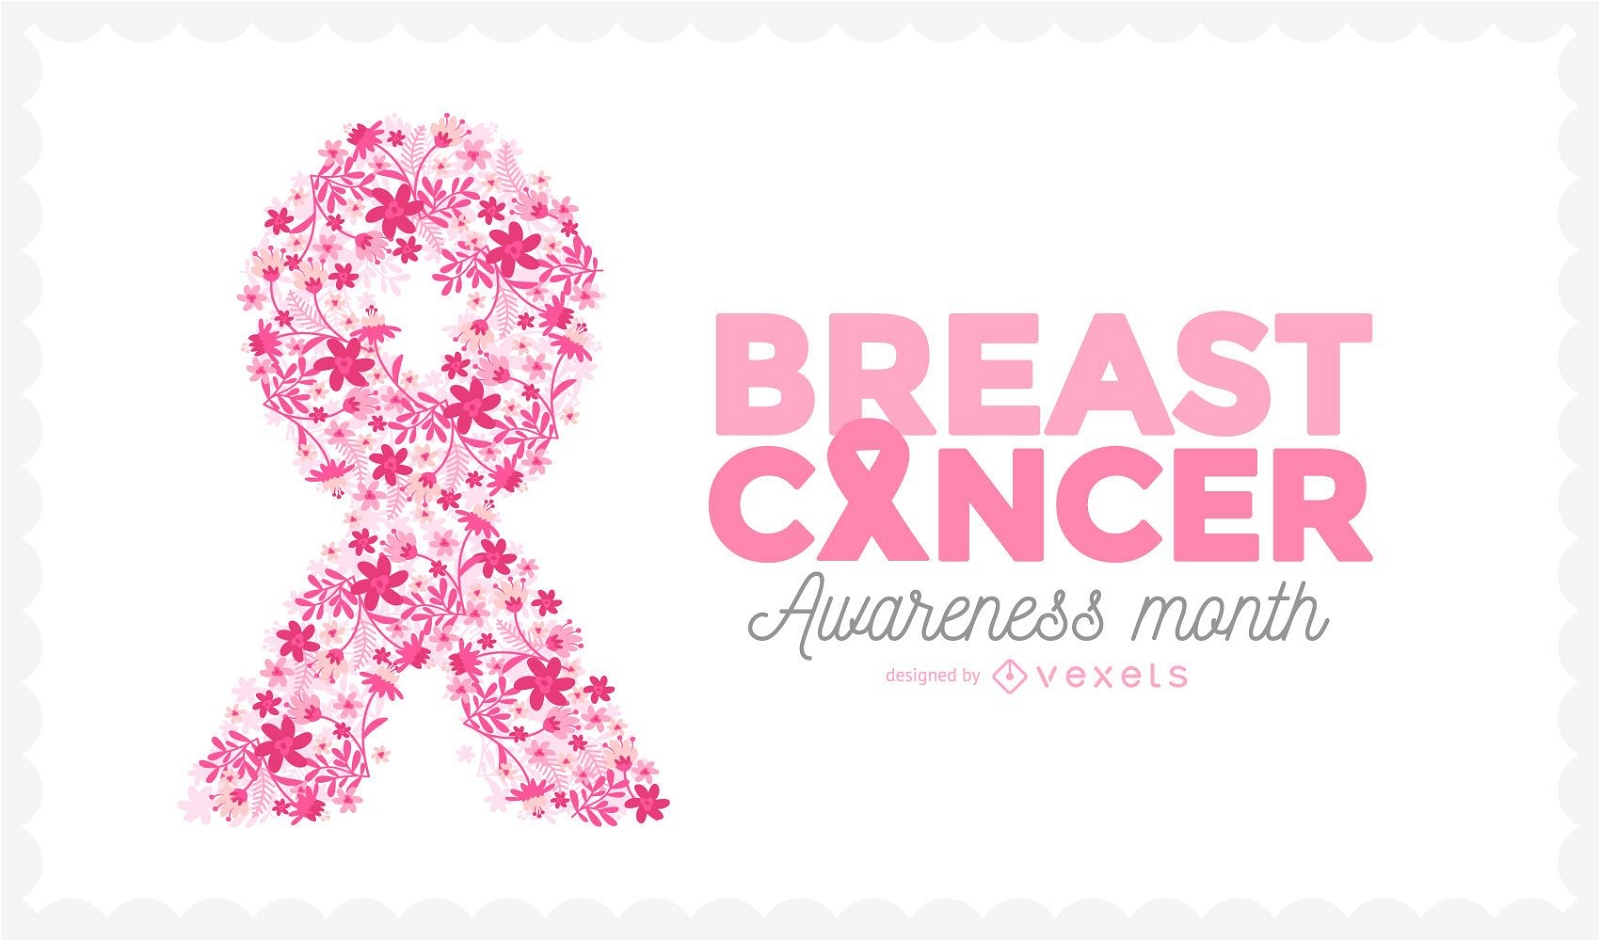 Breast Cancer Awareness poster